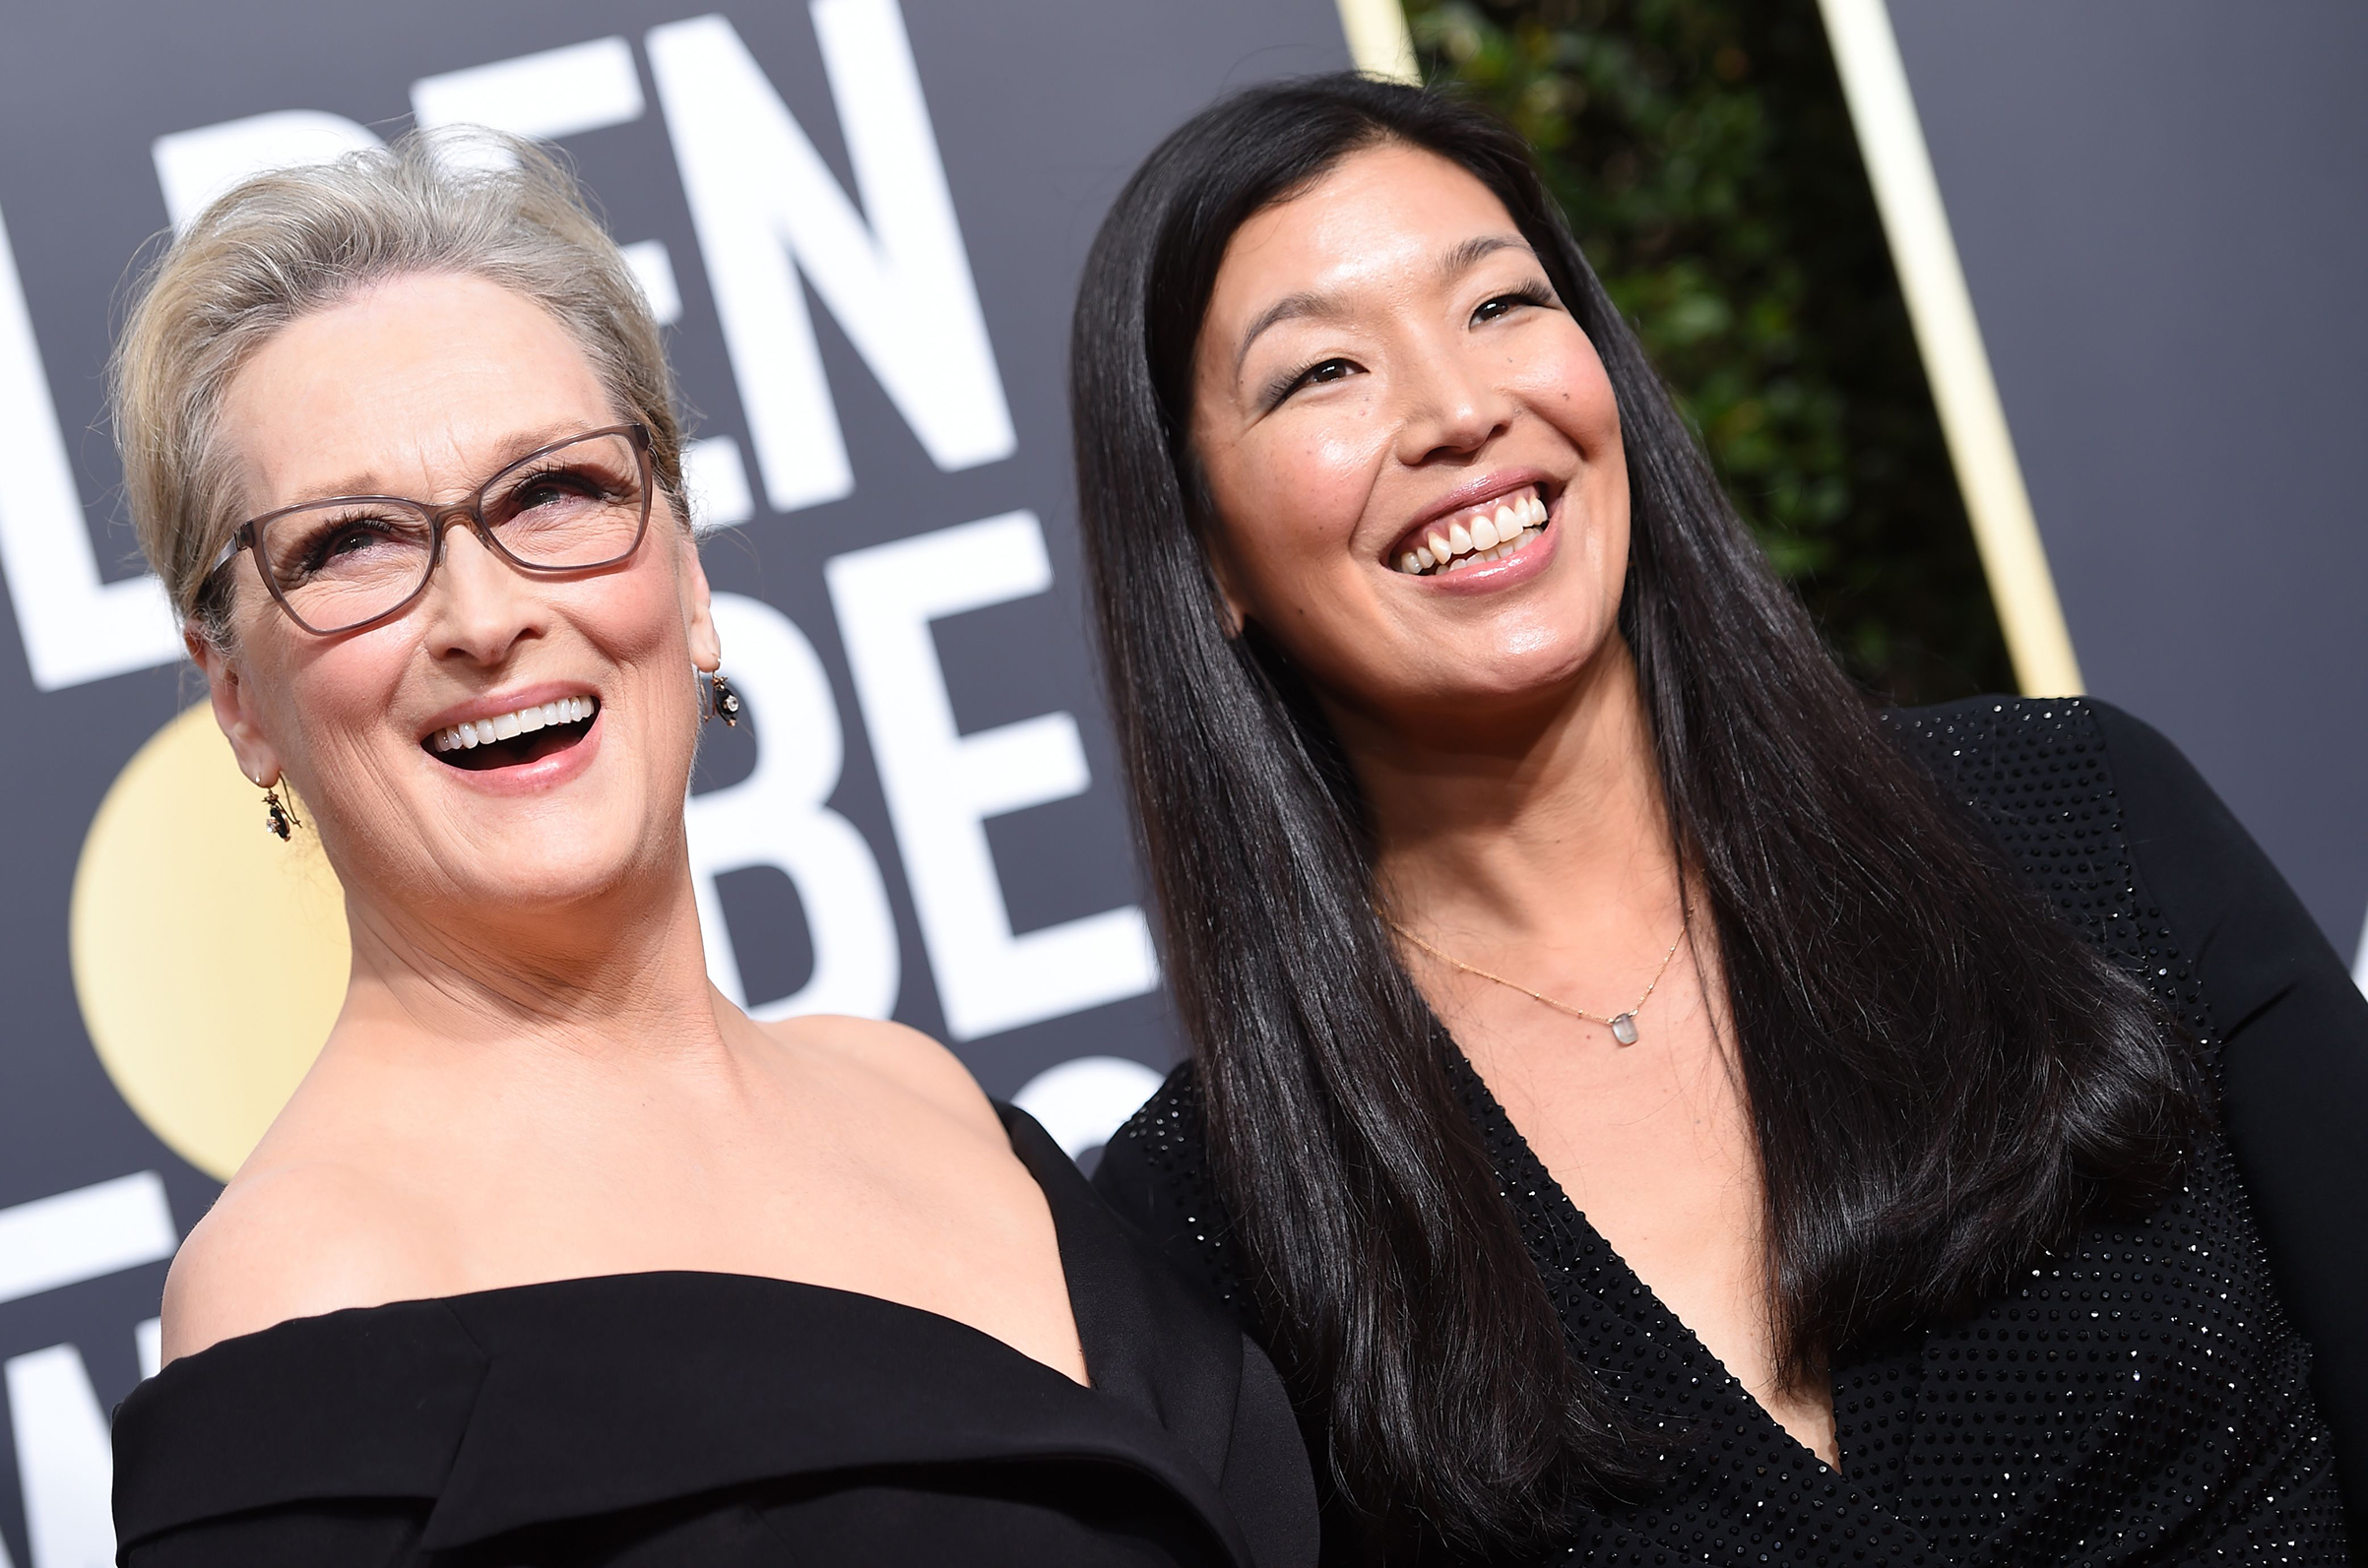 Meryl Streep and Ai-jen Poo, the head of the National Domestic Workers Alliance, arrive for the 75th Golden Globe Awards on January 7, 2018, in Beverly Hills, California. (VALERIE MACON—AFP/Getty Images)